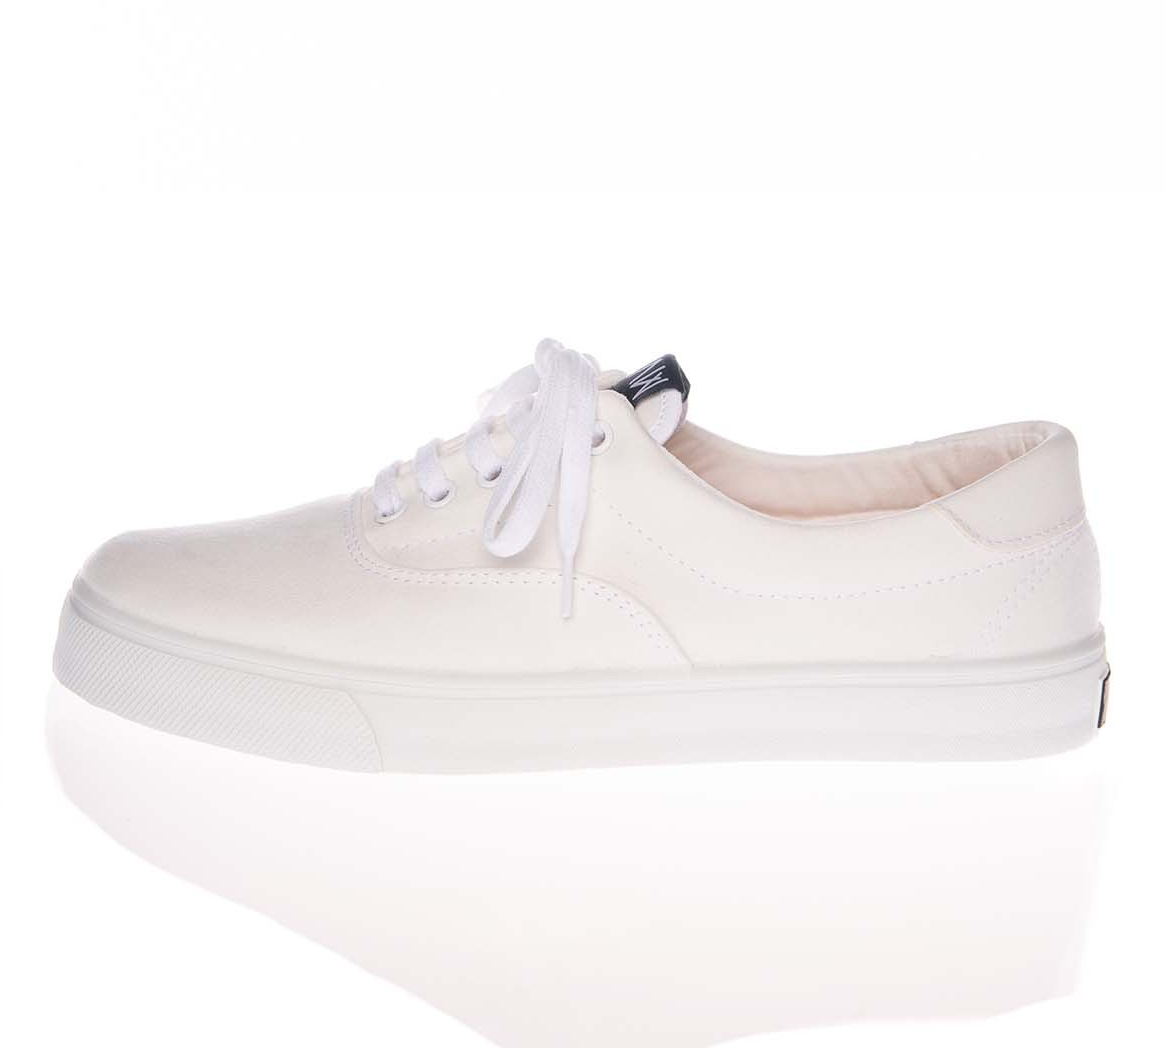 Wasted Shoes - Montecito White in White